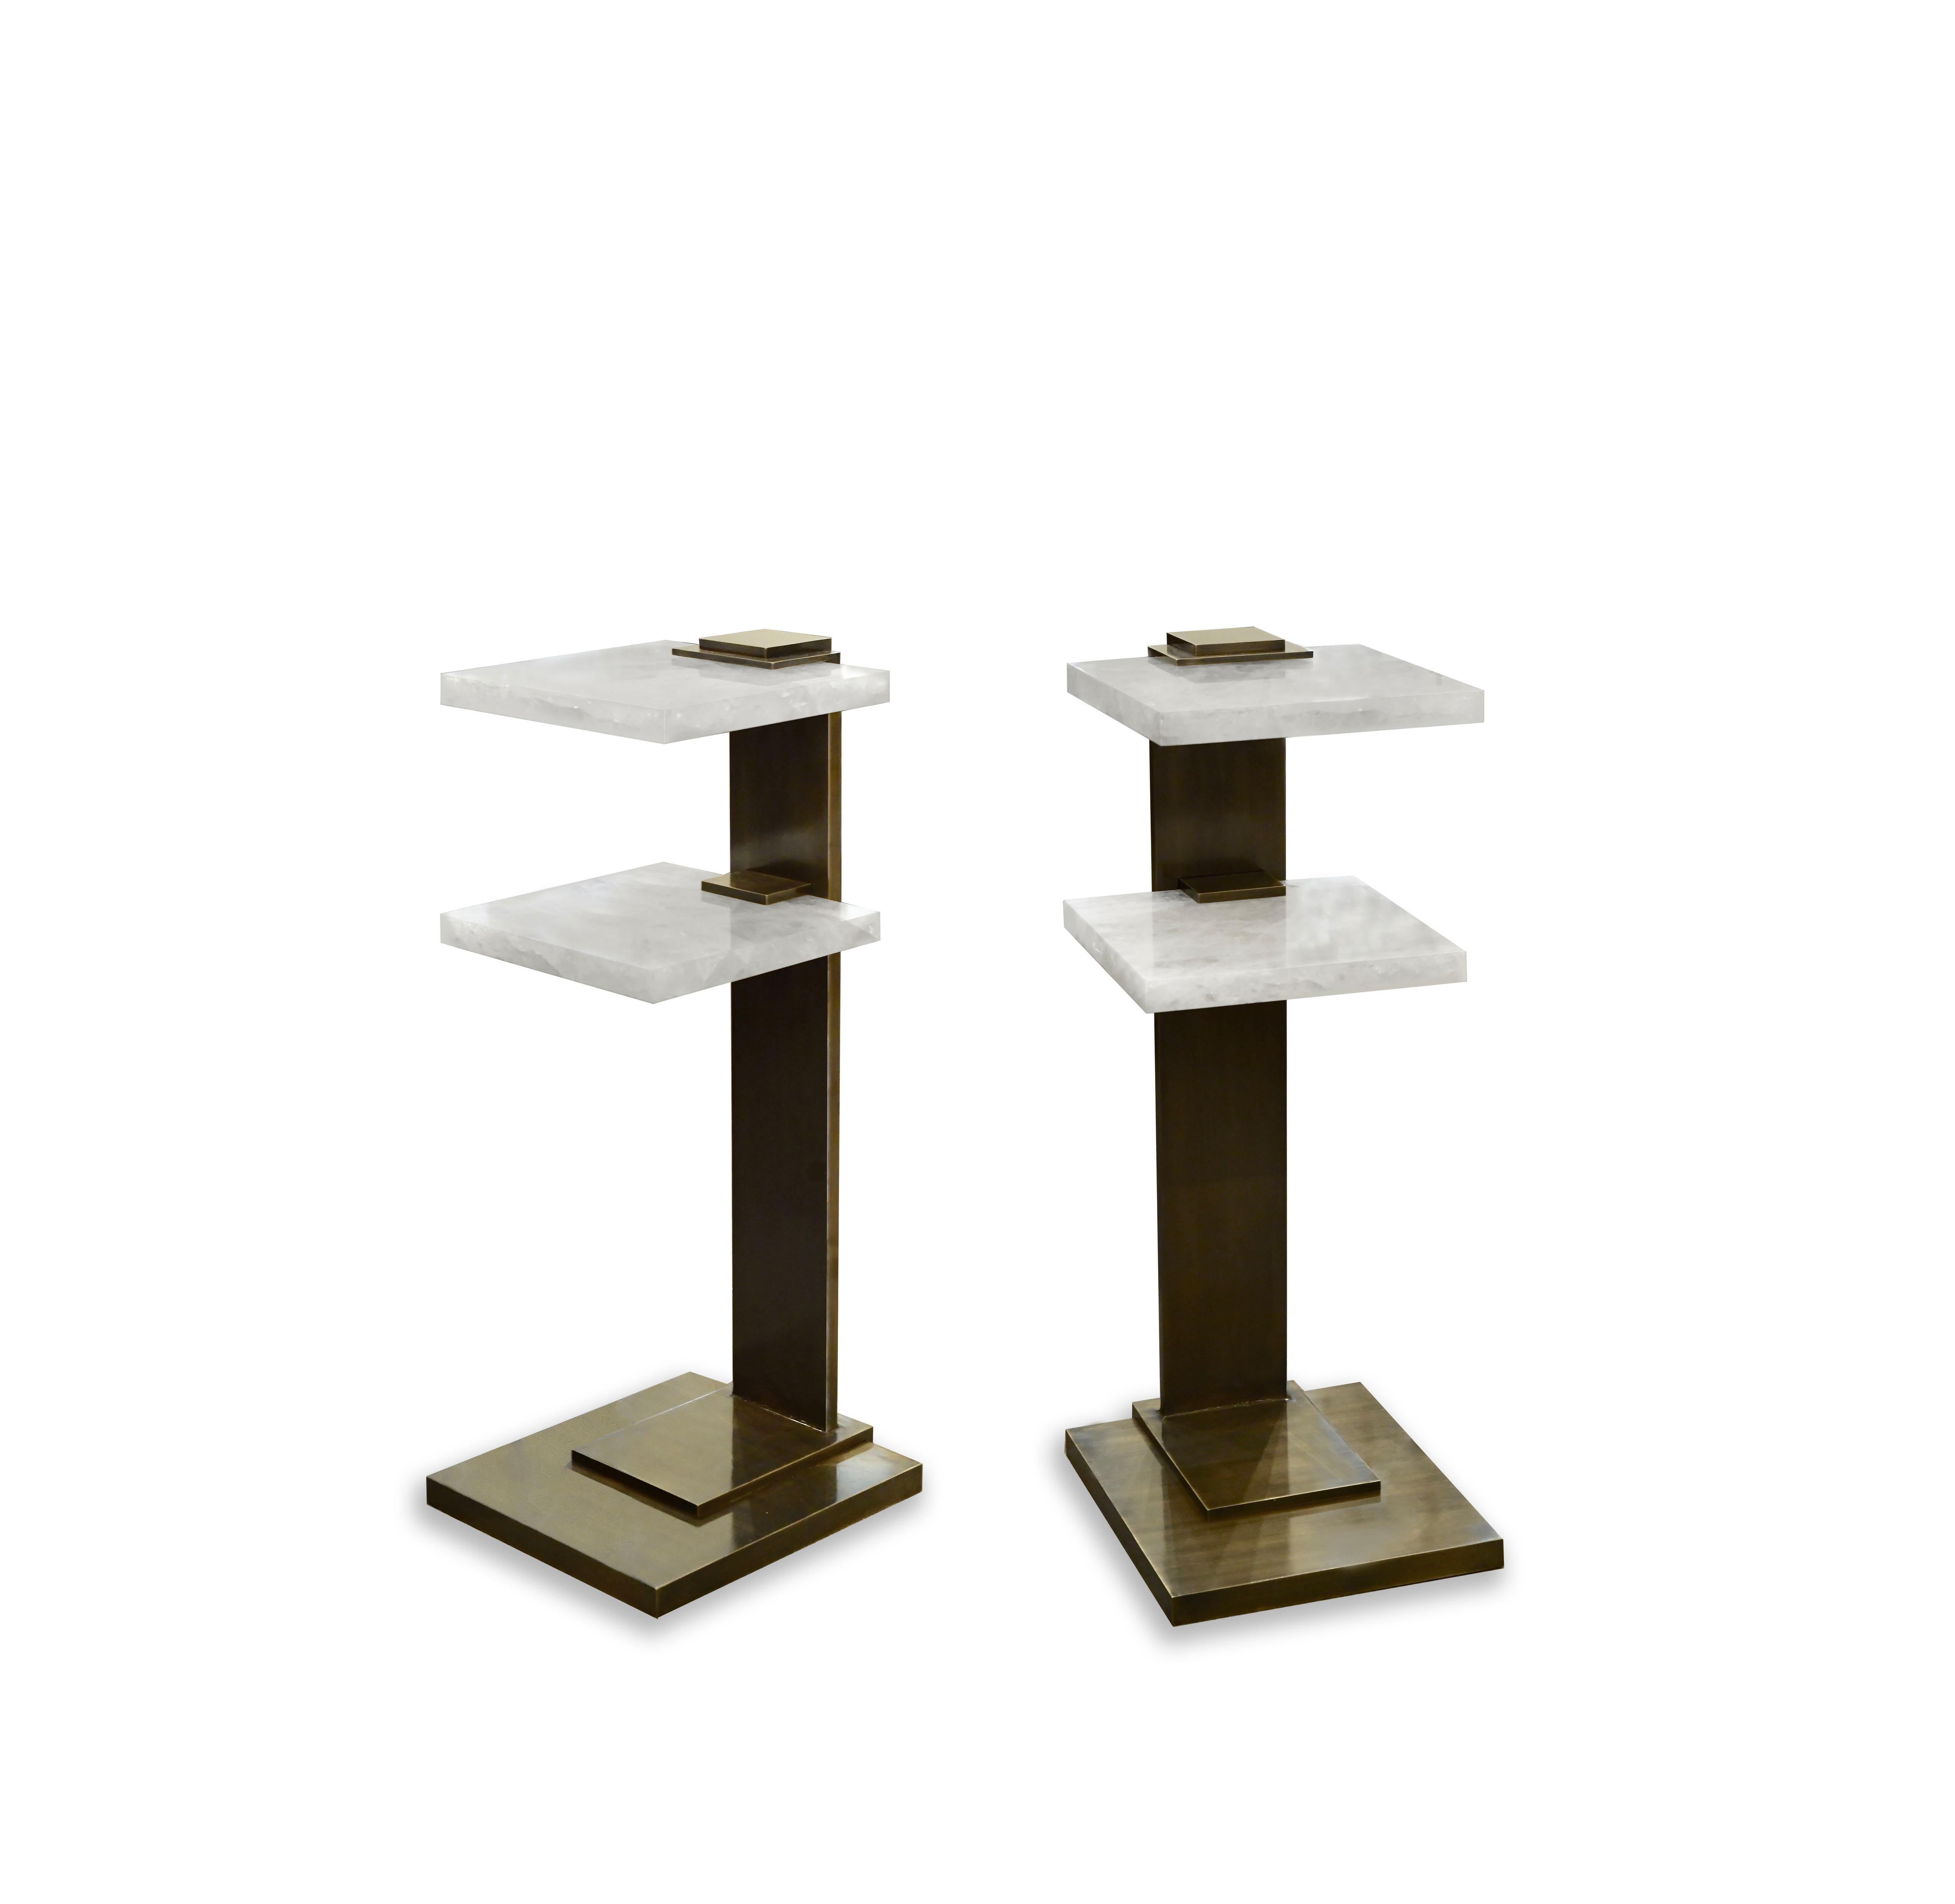 Pair of DWD rock crystal drinking tables with two rock crystal shelves.
Antique brass finish. Created by Phoenix Gallery.
Custom size upon request.